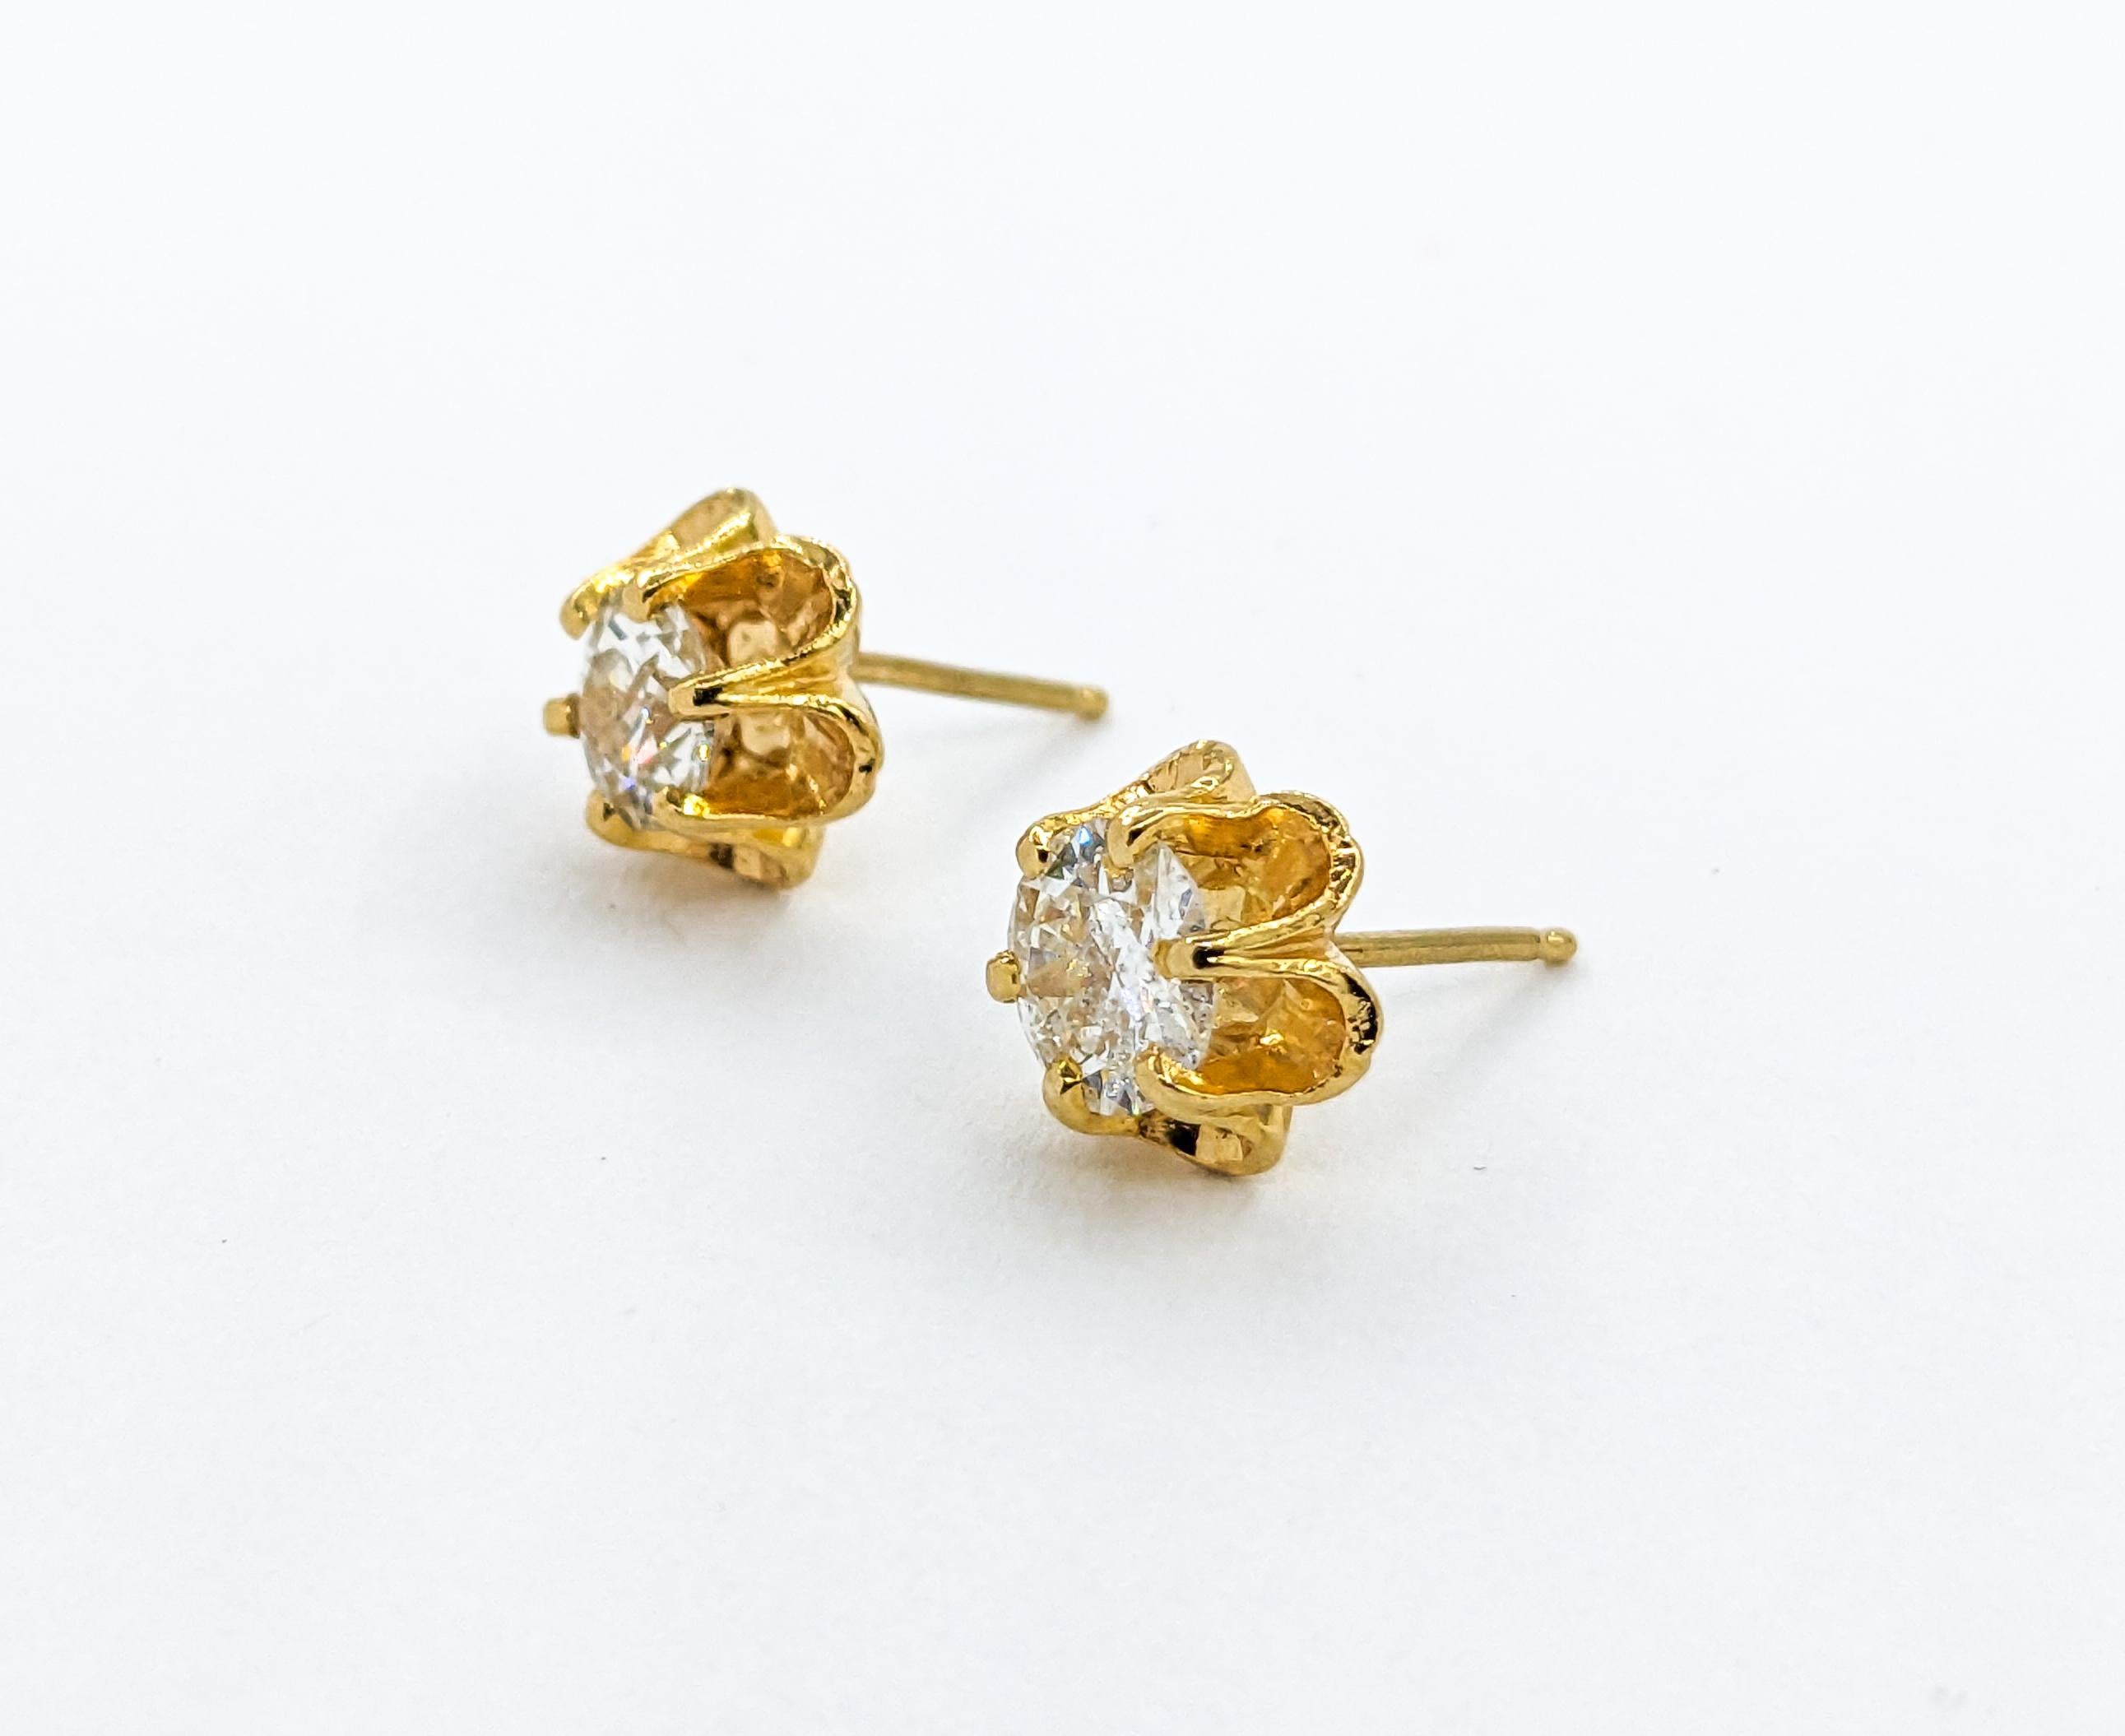 1.25ctw Diamond Buttercup Stud Earrings In Yellow Gold

Introducing these exquisite Vintage Earrings expertly crafted in 14kt yellow gold. These stunning earrings showcase a total of 1.25 carats of Old European Cut diamonds, elegantly set in a